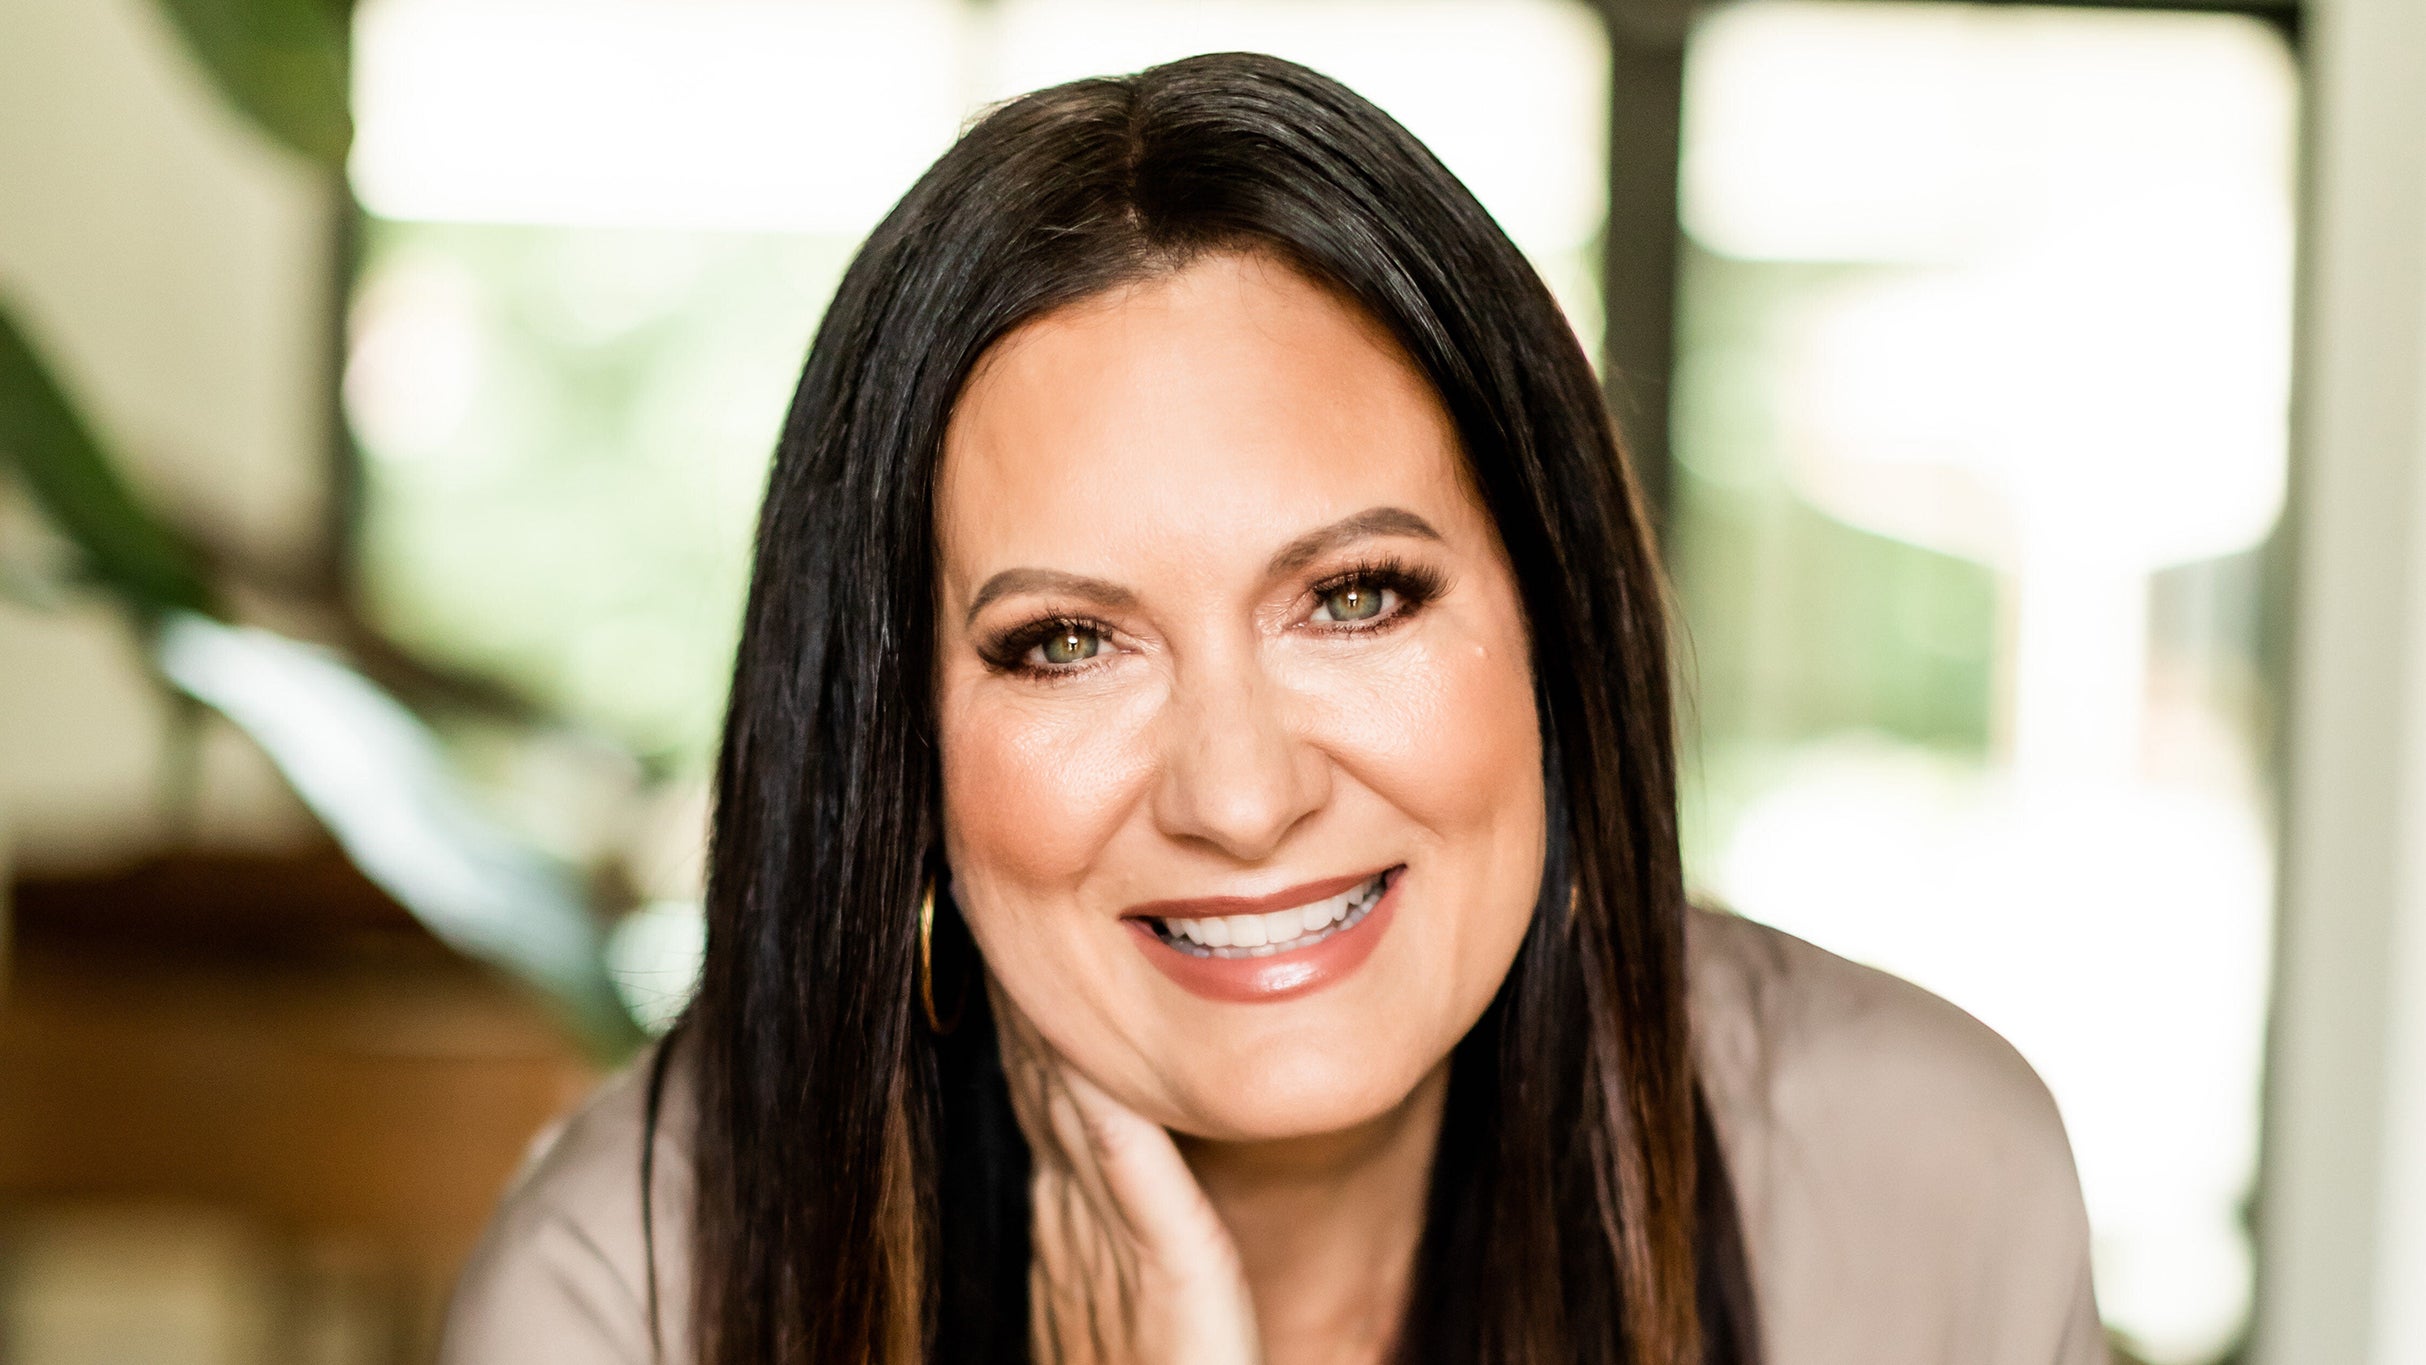 The Good Boundaries and Goodbyes Book Tour with Lysa TerKeurst in Naperville promo photo for Official Platinum Onsale presale offer code